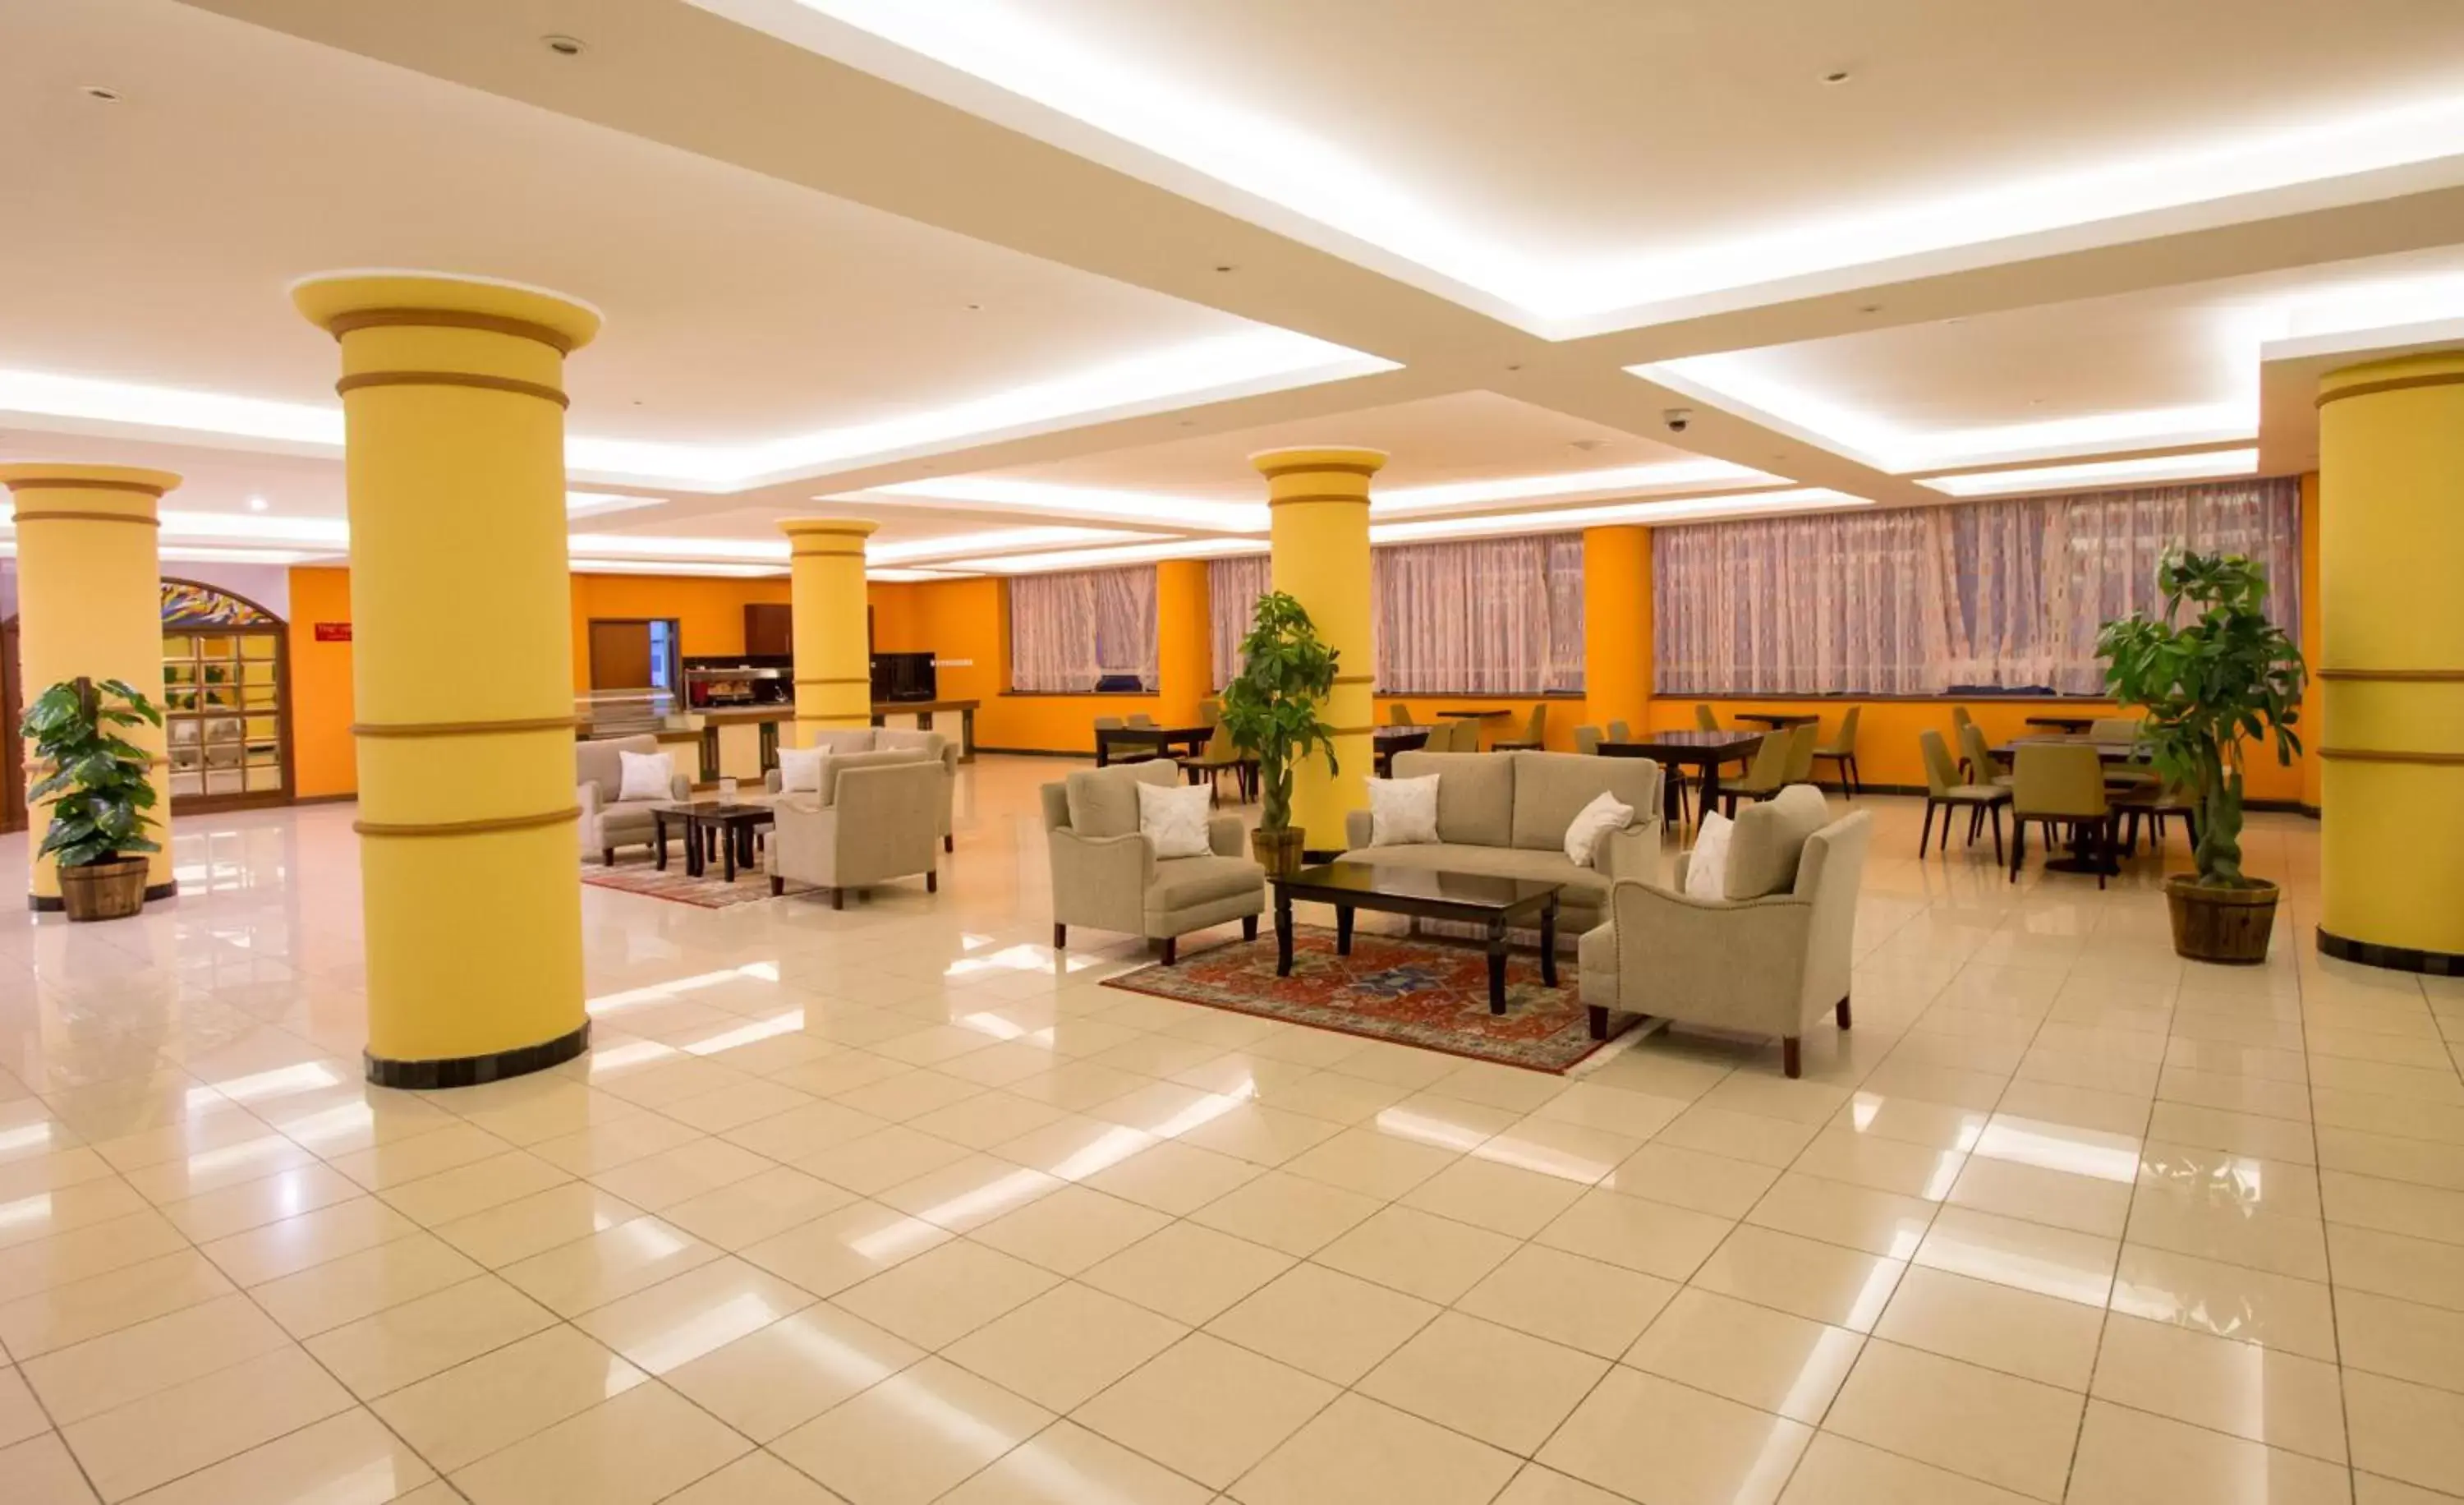 Area and facilities, Lobby/Reception in The Panari Hotel